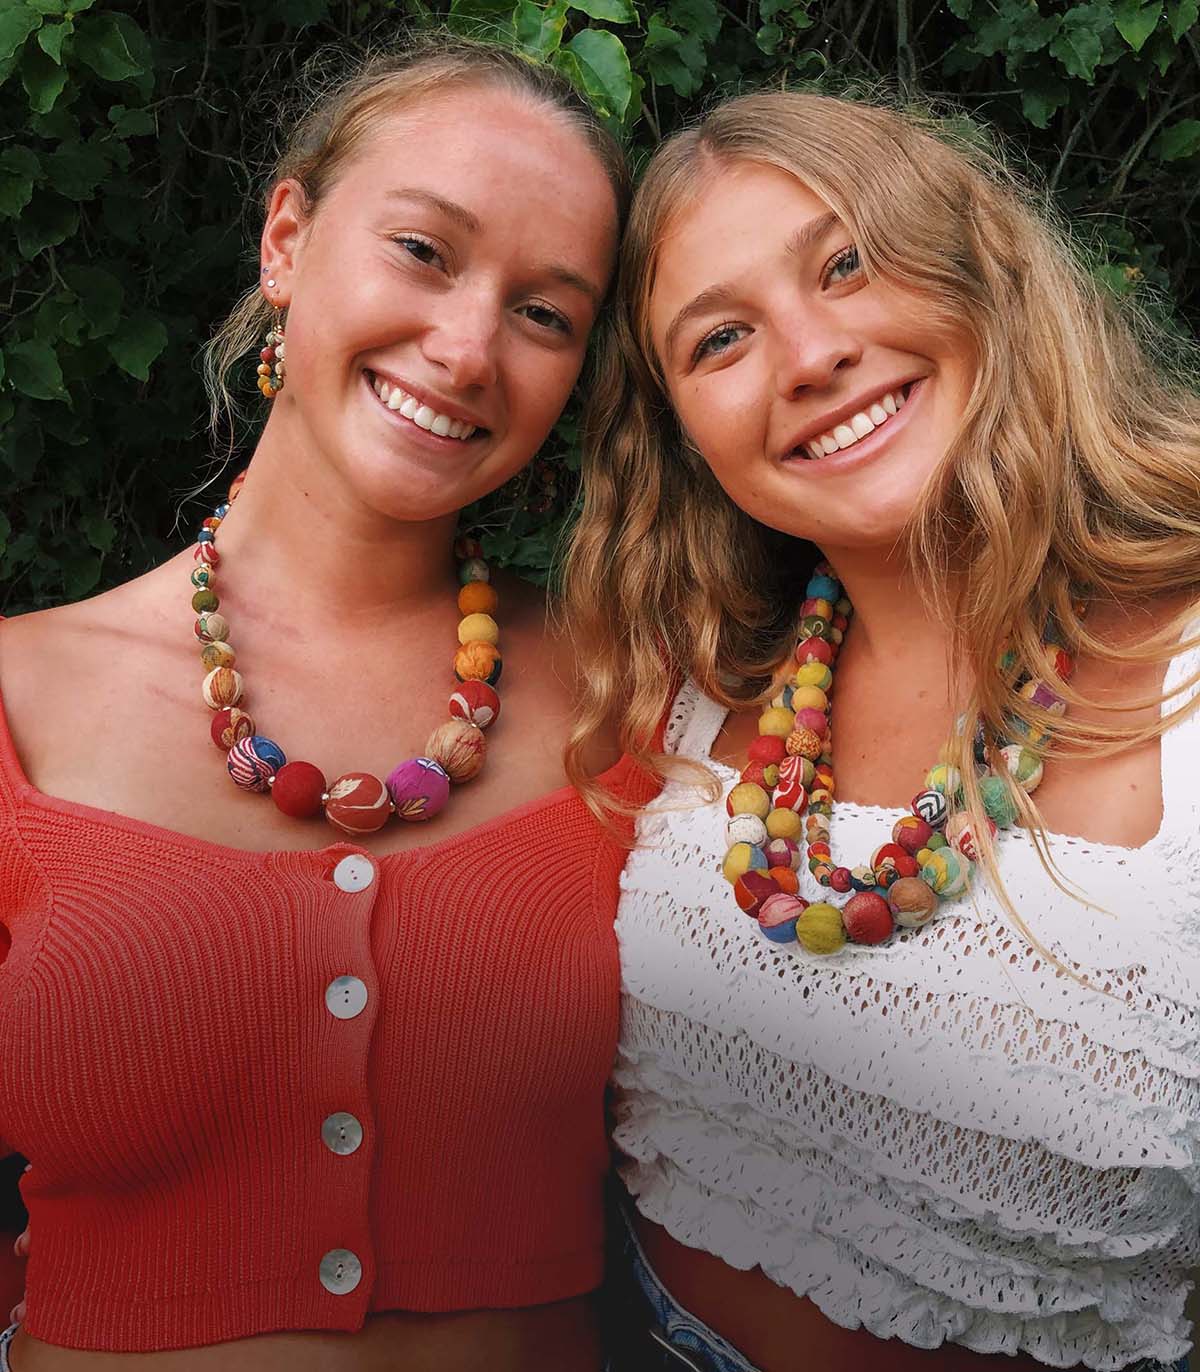 Two women smile at the camera while modeling colorful beaded jewelry.